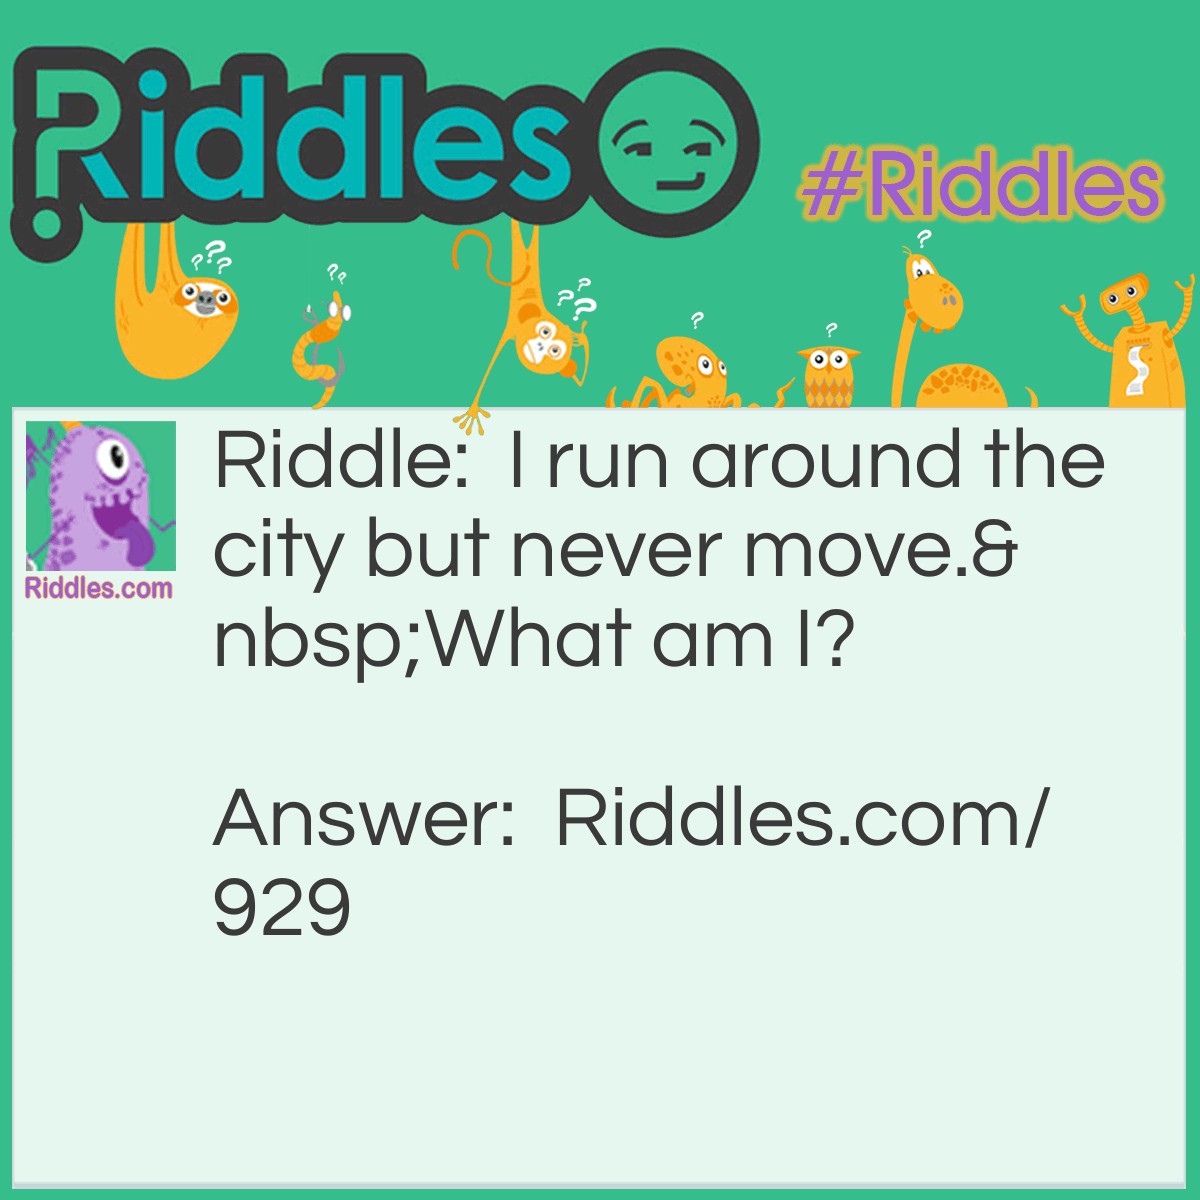 Riddle: I run around cities but never move.
What am I? Answer: A wall.